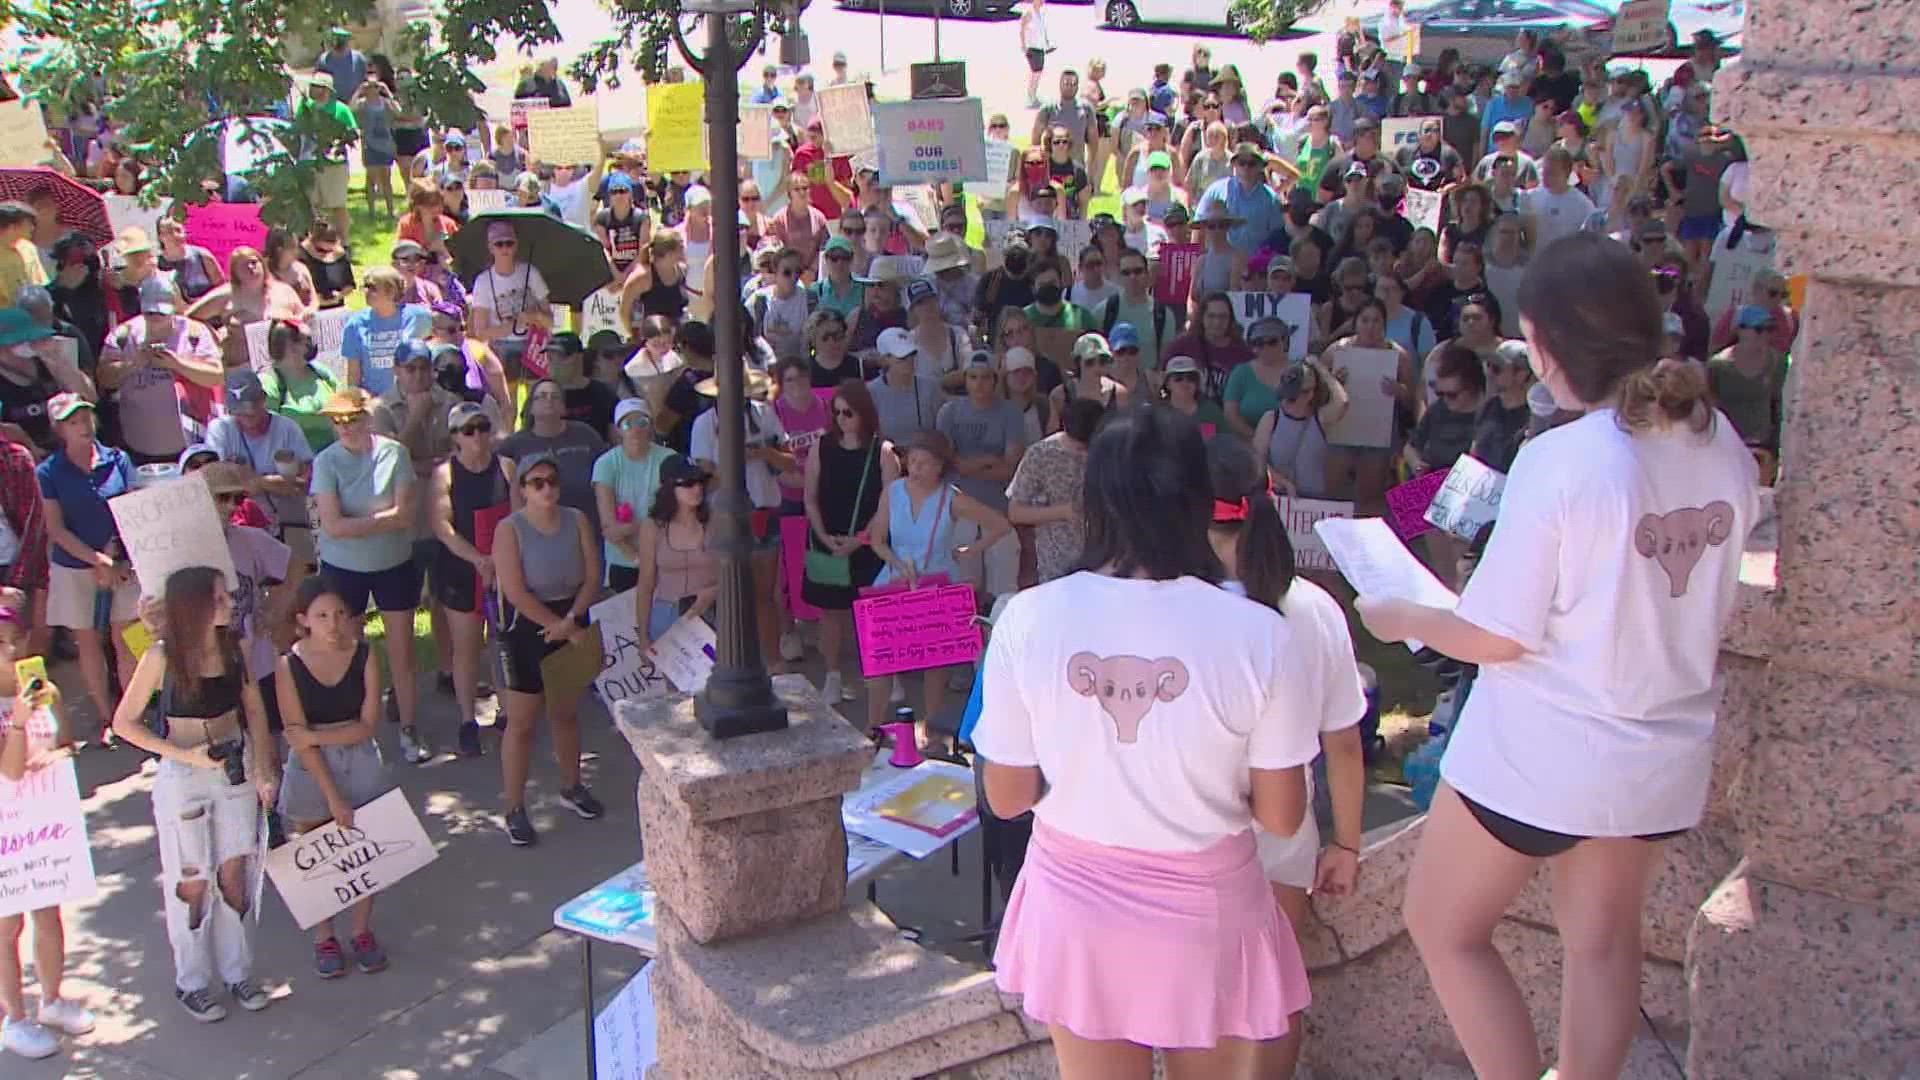 Hundreds of protesters gathered and marched in Fort Worth on Saturday.